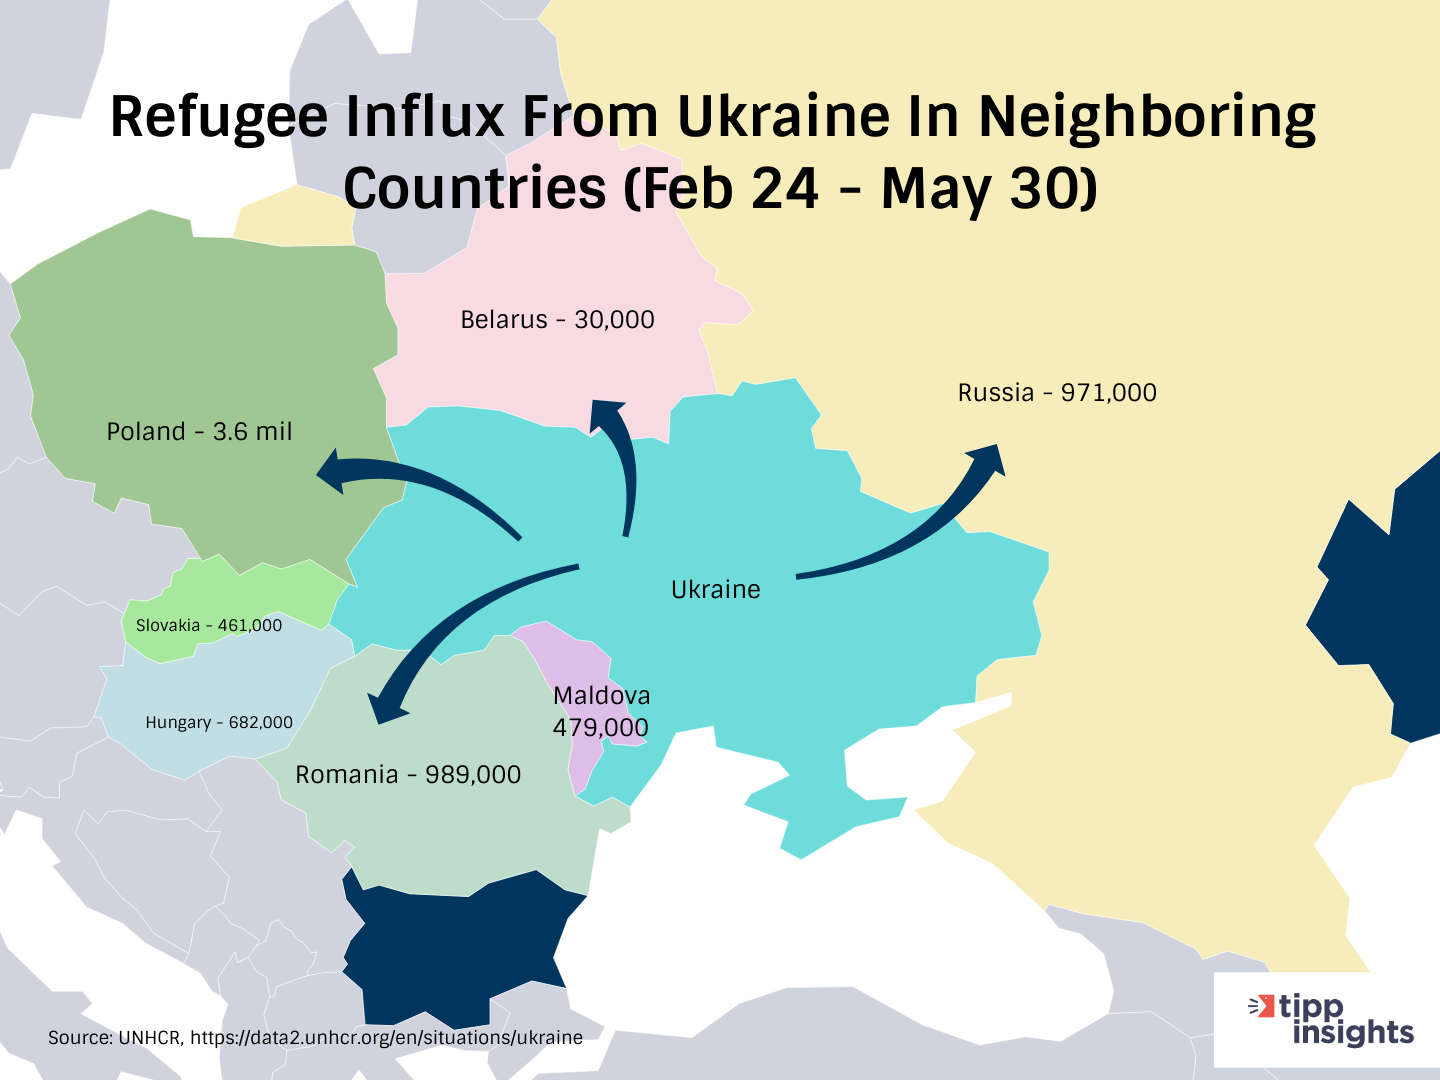 Map showing refugee influx from Ukraine in Neighboring countries February 24th to May 30th